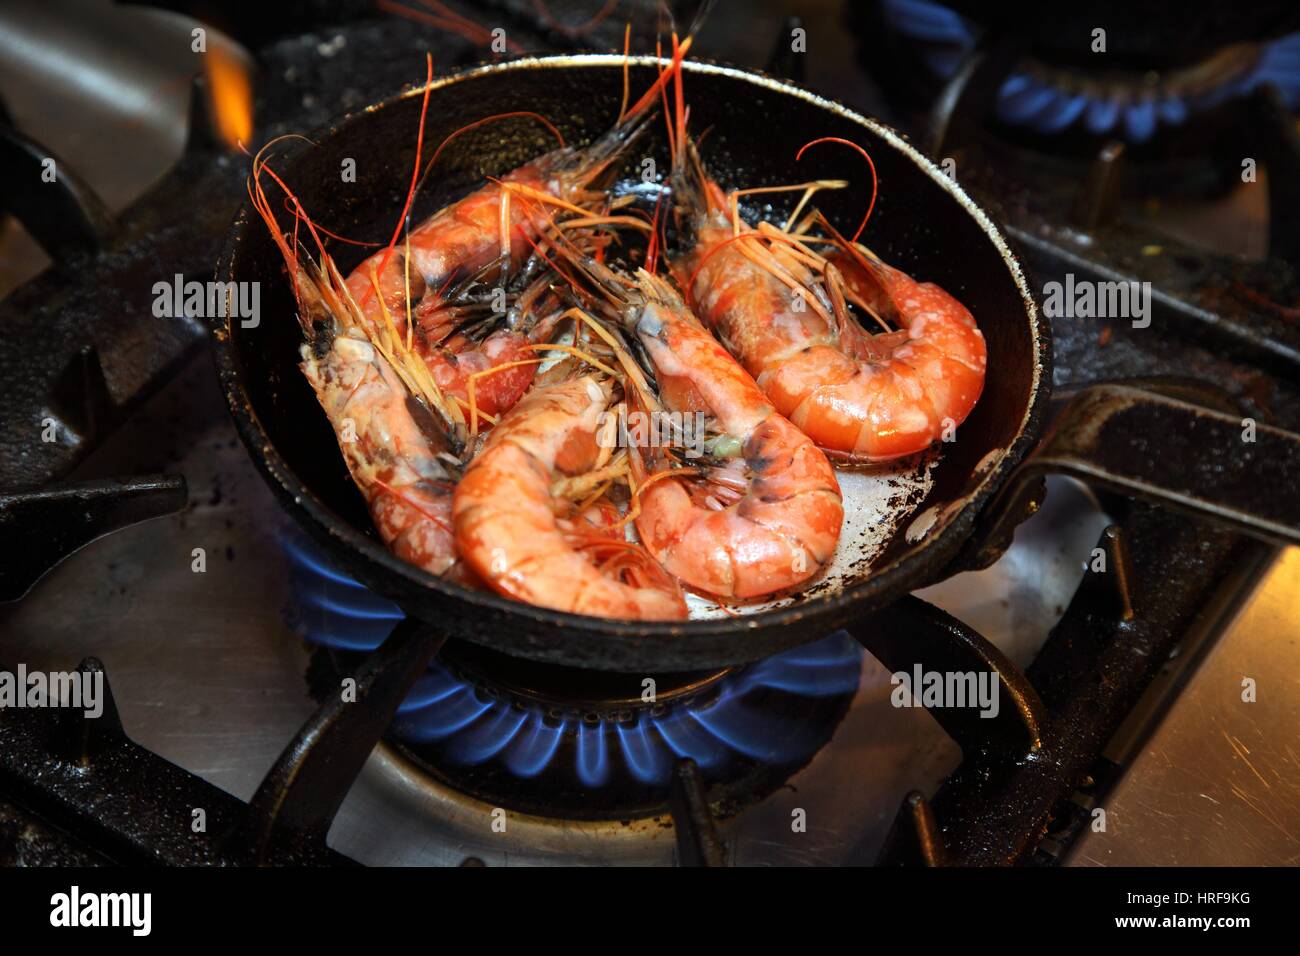 https://c8.alamy.com/comp/HRF9KG/cooking-large-prawns-langoustines-in-a-frying-pan-within-a-commercial-HRF9KG.jpg